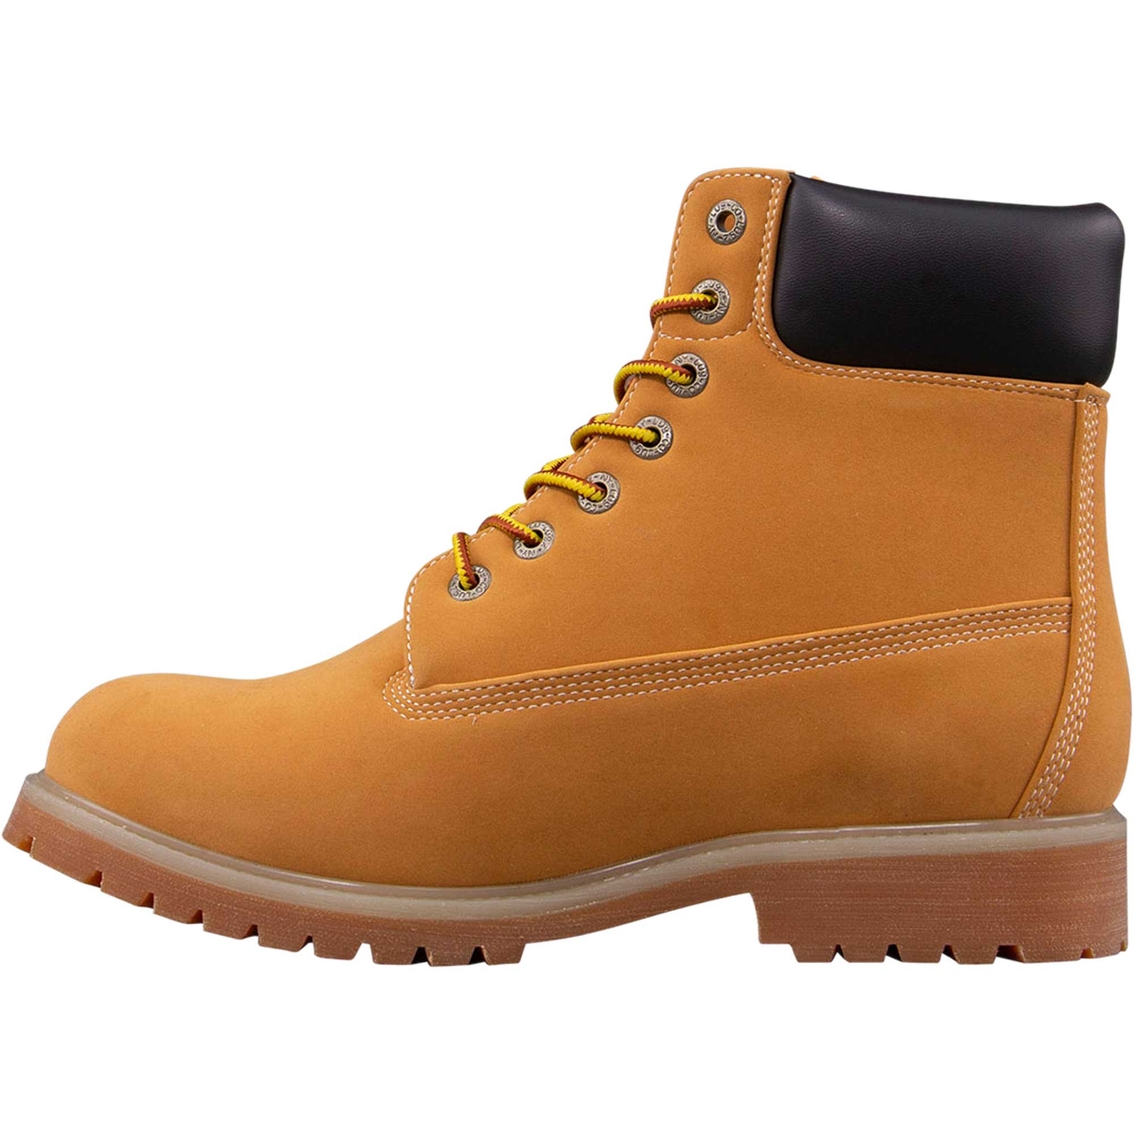 Lugz Men's Convoy 6 in. Boots - Image 4 of 6